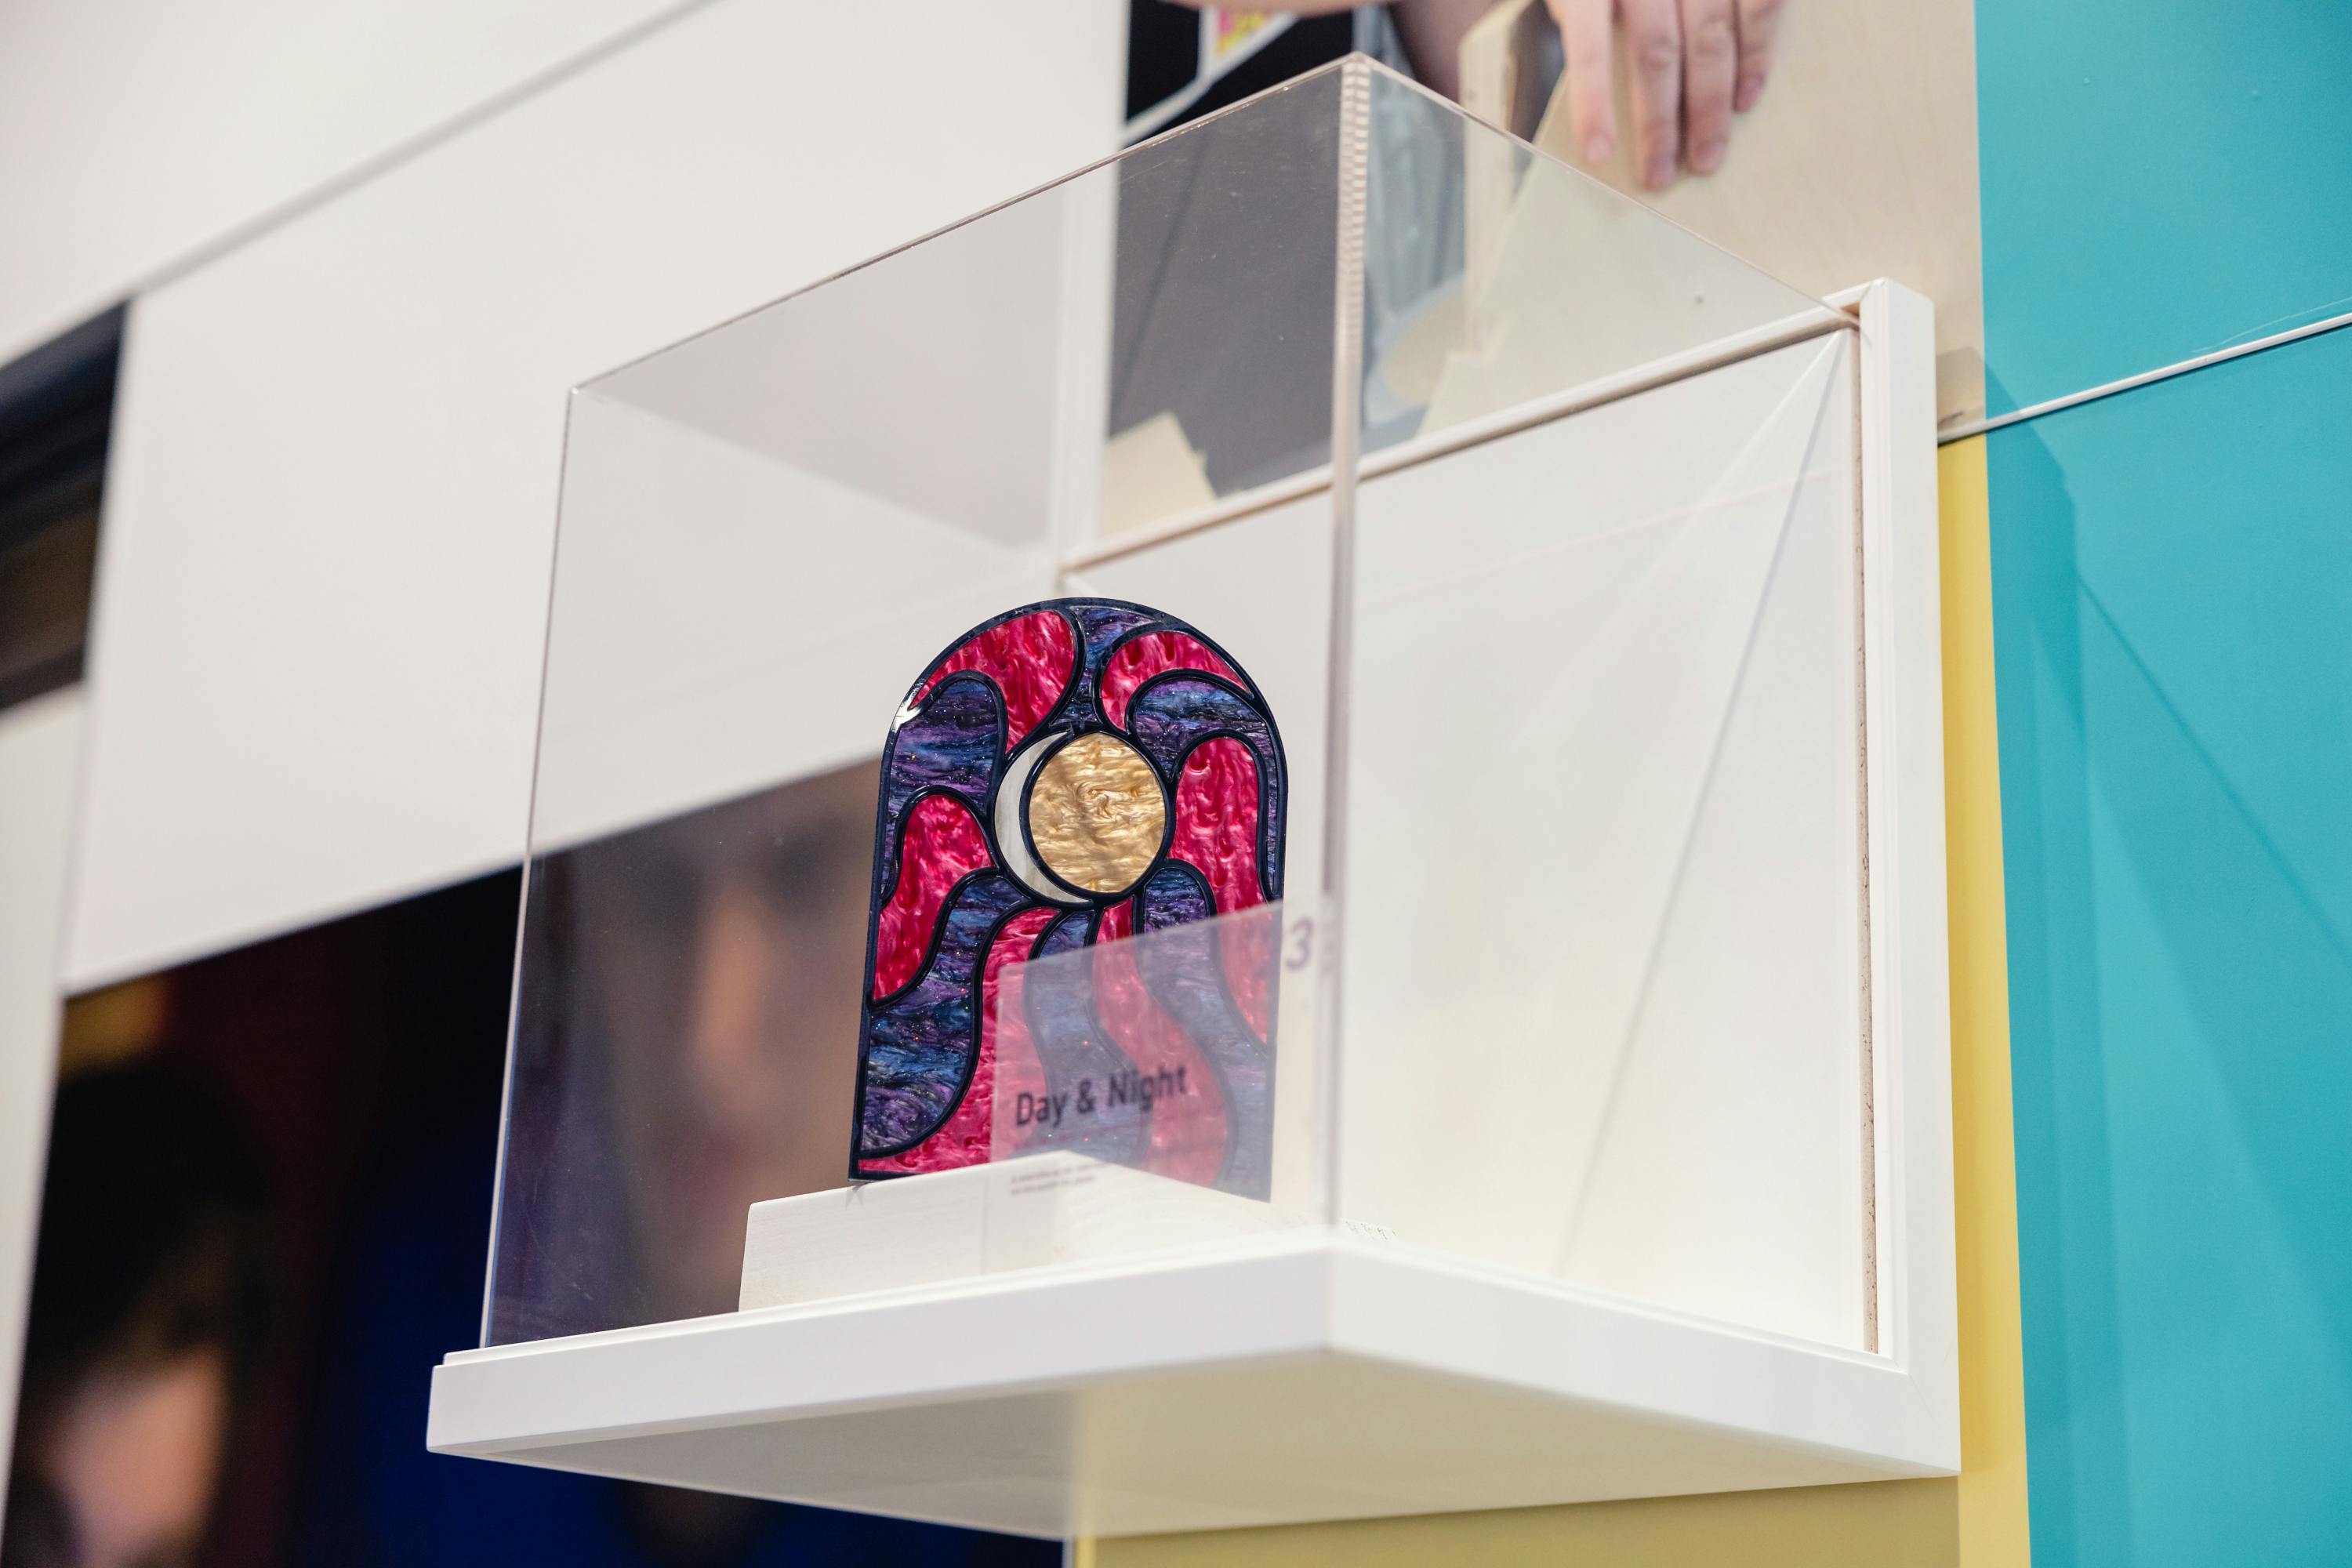 A colorful artistic object sits in a plastic exhibit box on a shelf